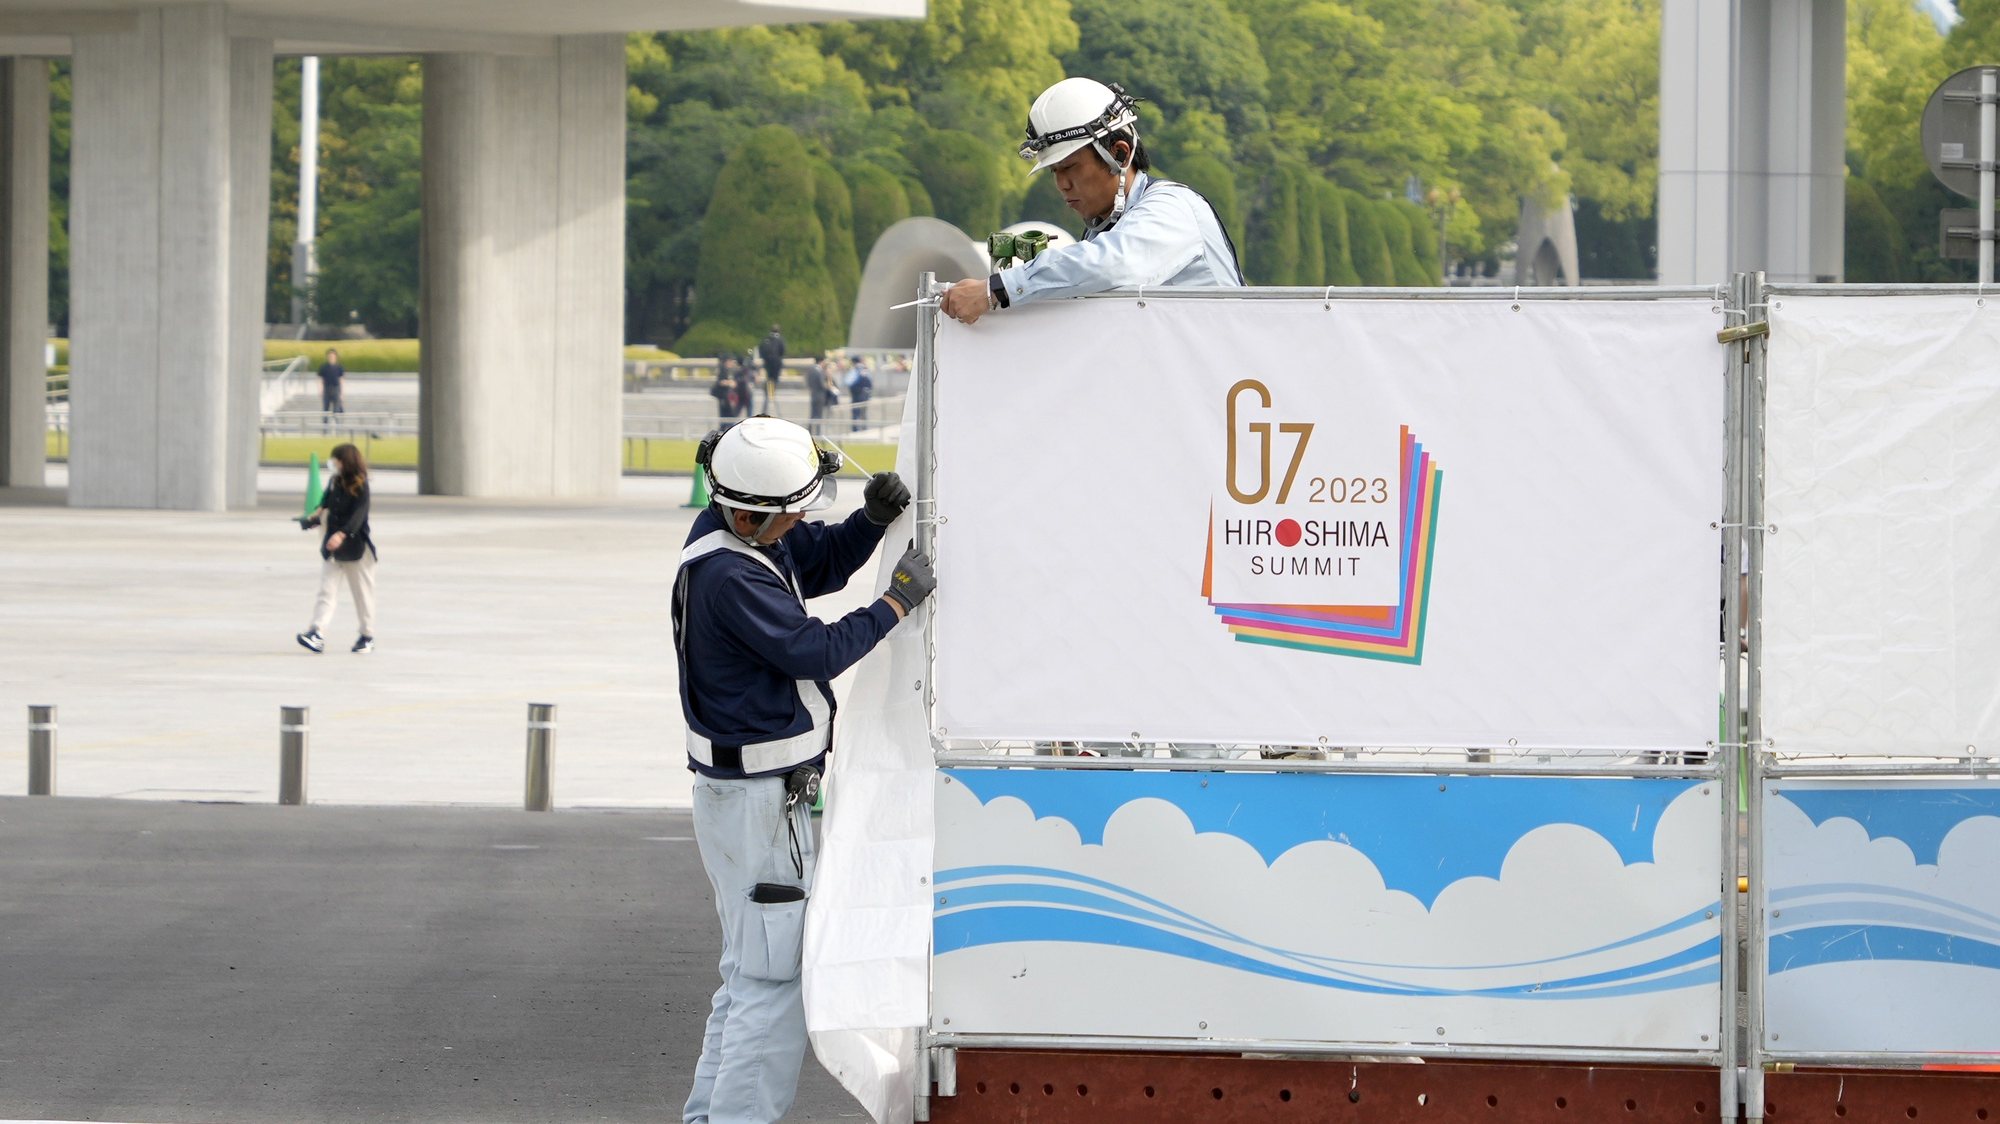 epa10635460 Workers set up a fence around Hiroshima Peace Memorial Park ahead of the G7 Hiroshima Summit in Hiroshima, western Japan, 18 May 2023. The G7 Hiroshima Summit will be held from 19 to 21 May 2023.  EPA/FRANCK ROBICHON